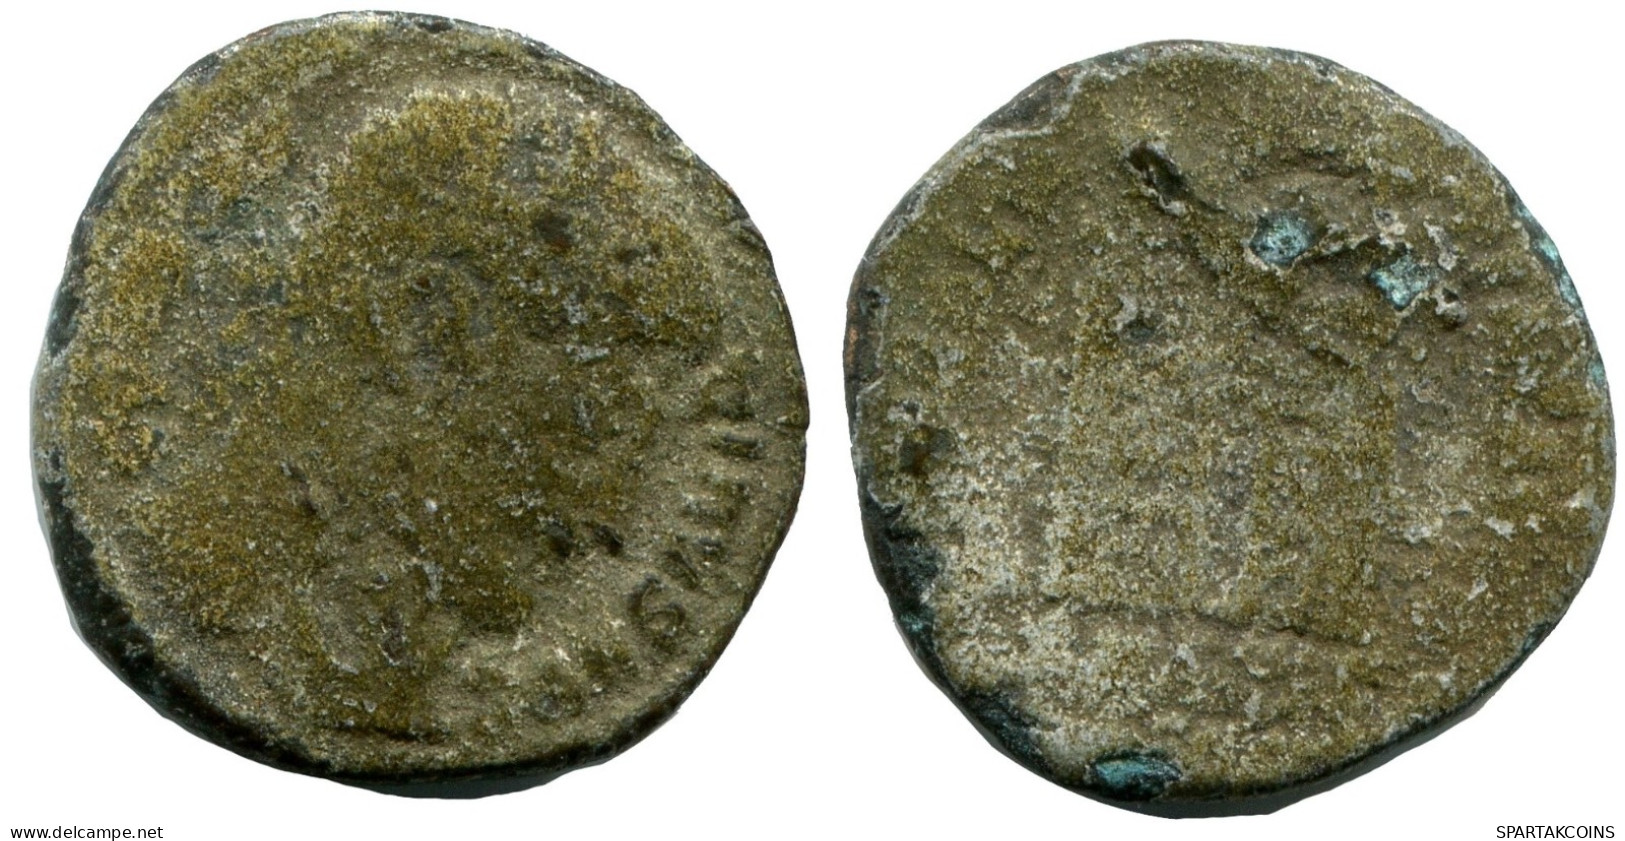 CONSTANTINE I MINTED IN ANTIOCH FROM THE ROYAL ONTARIO MUSEUM #ANC10676.14.U.A - El Impero Christiano (307 / 363)